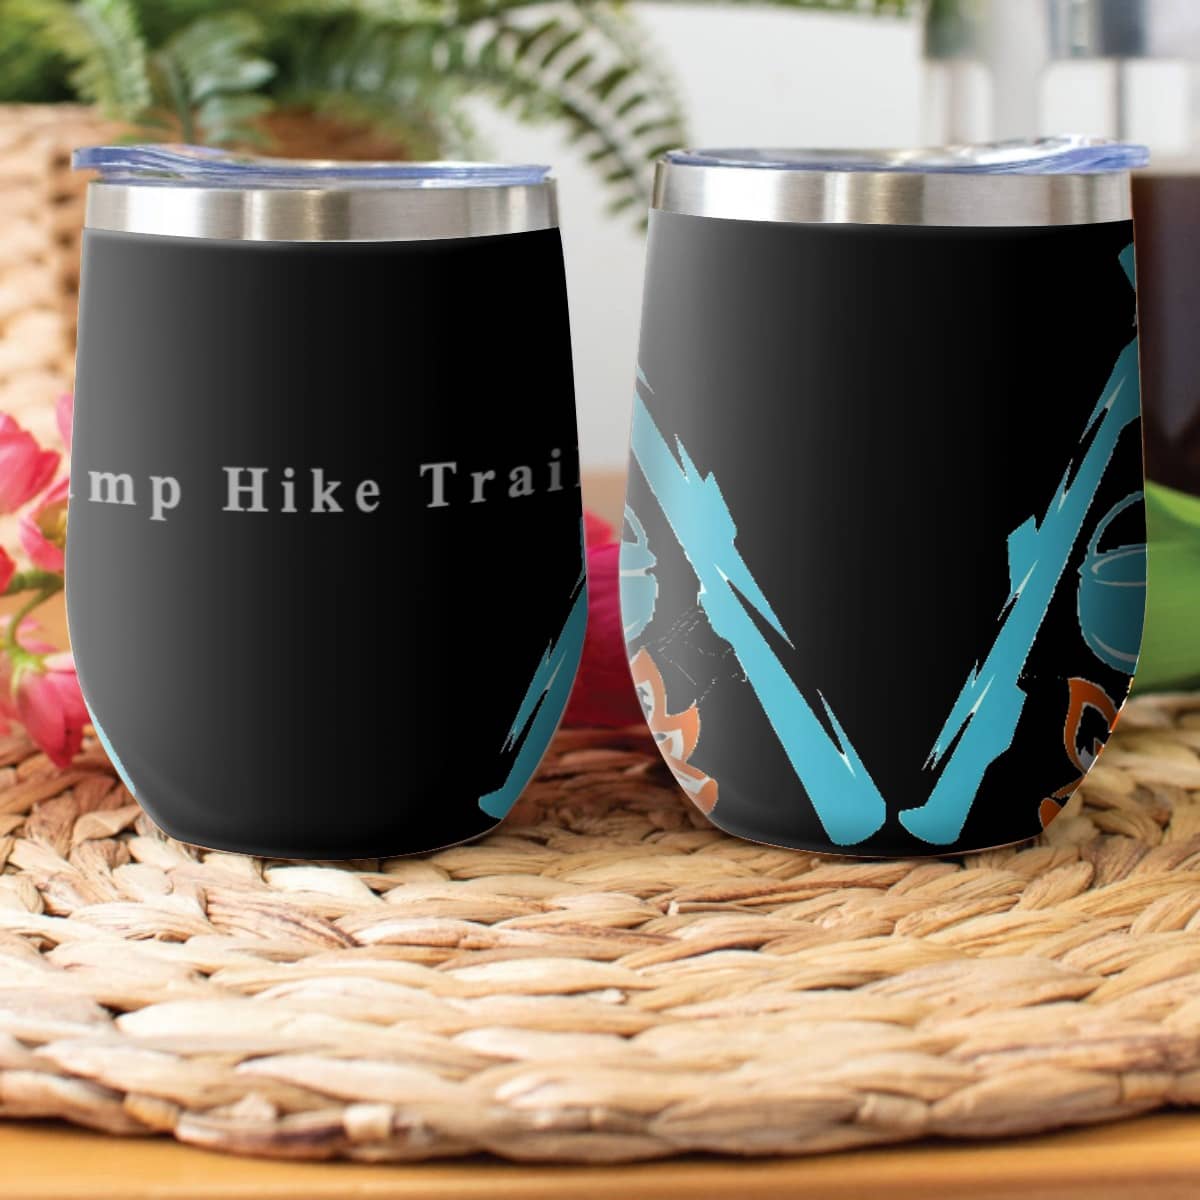 Camp Hike Trail Stainless Steel Cup